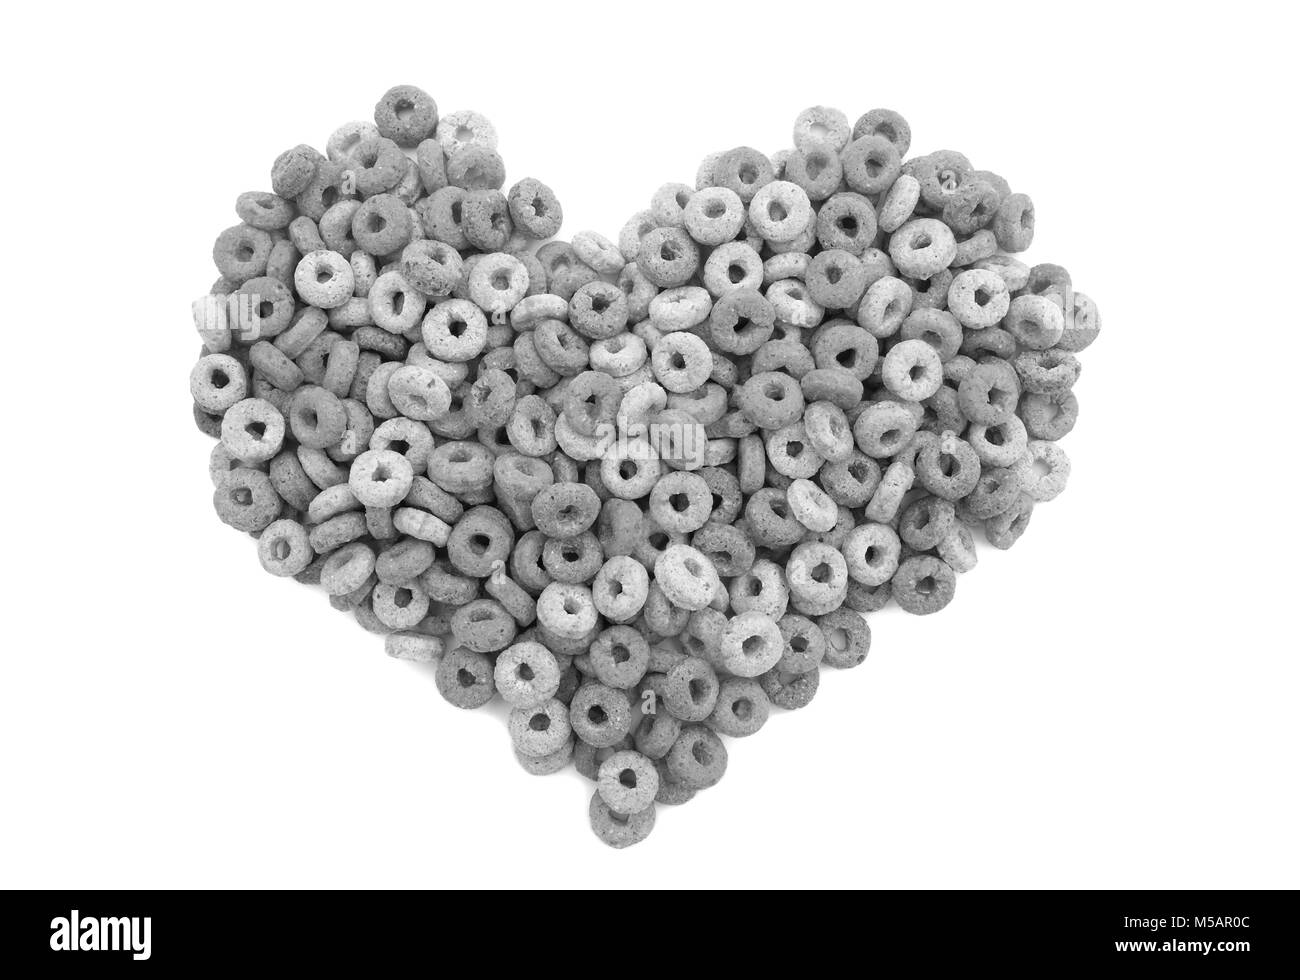 Multigrain hoops breakfast cereal - wheat, barley, rice, oats and maize - in a heart shape, isolated on a white background - monochrome processing Stock Photo